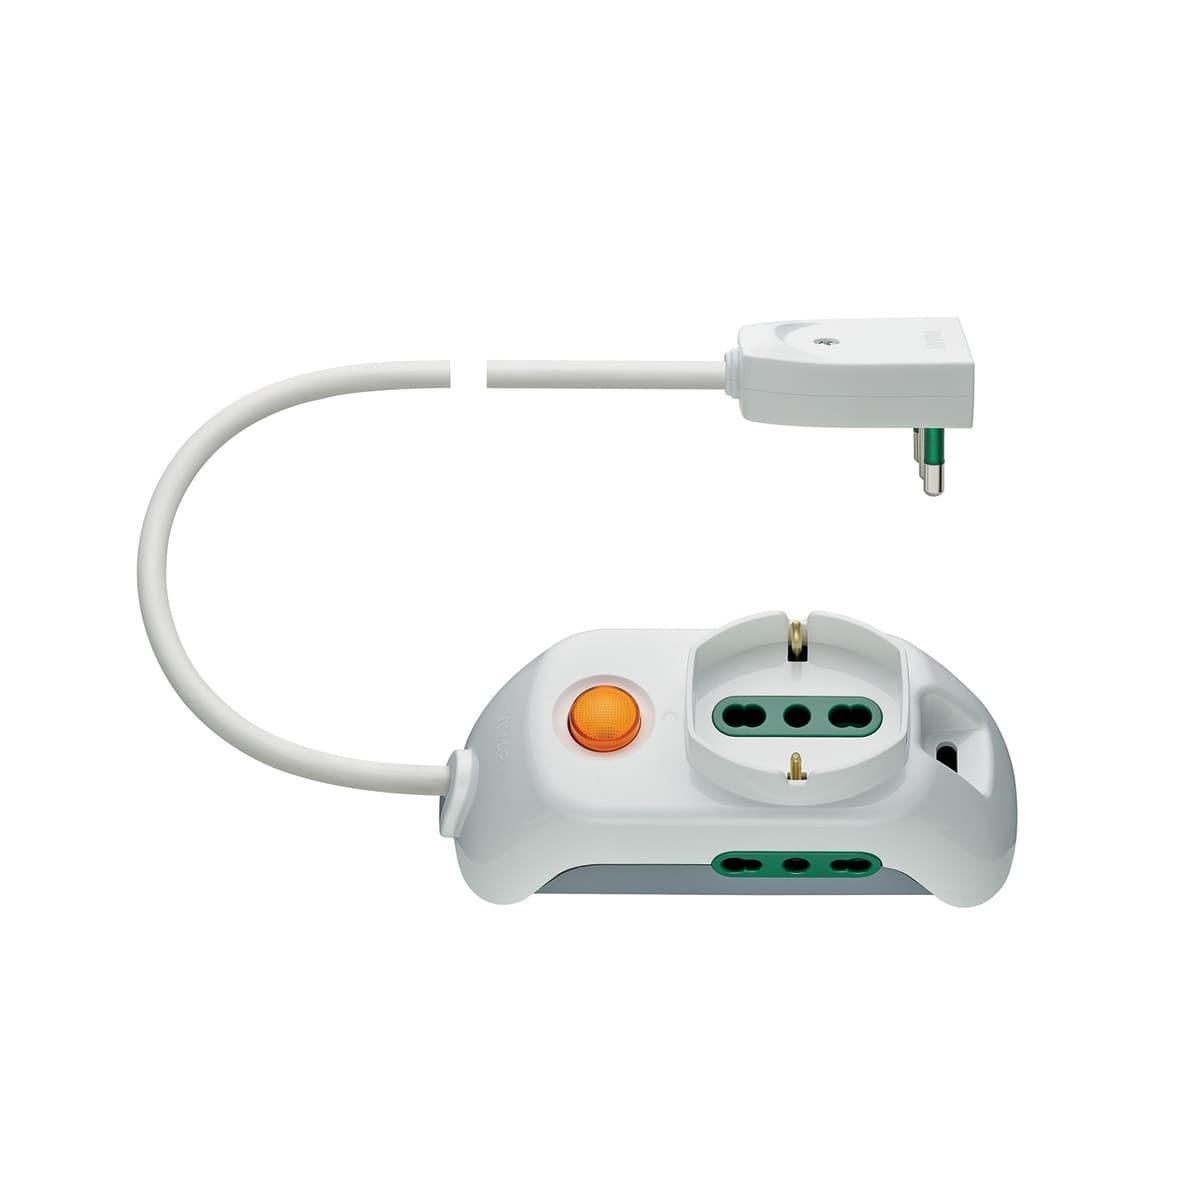 MULTISOCKET 16A PLUG 3 SOCKETS 1 UNIVERSAL 2 10/16A CABLE 3MT SWITCH WHITE - best price from Maltashopper.com BR420003036